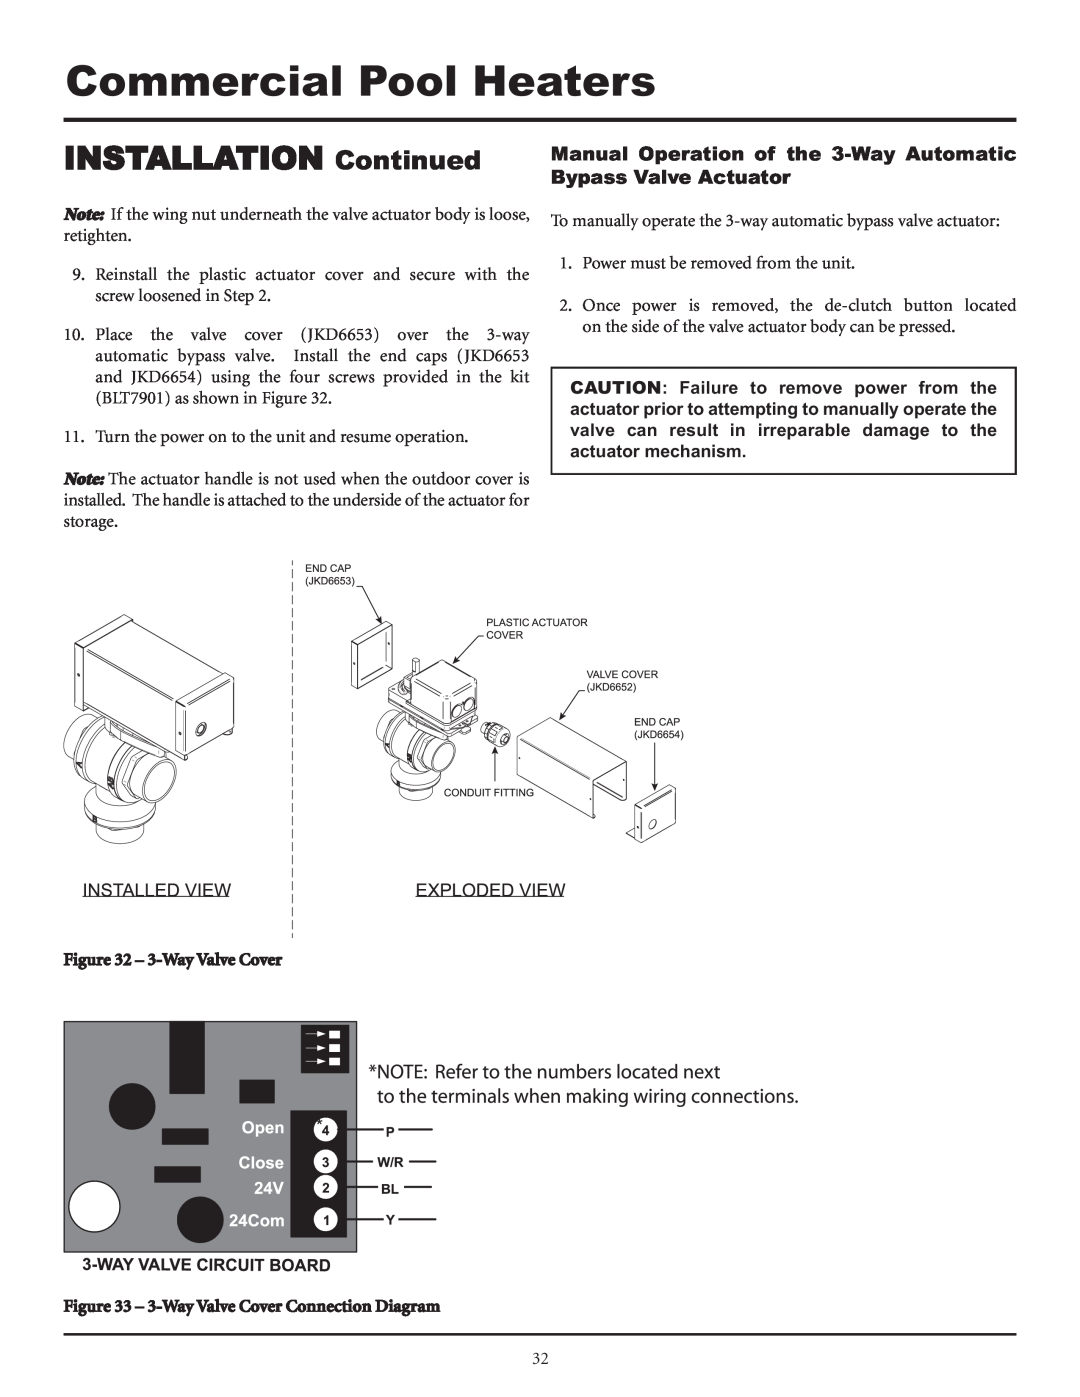 Lochinvar F0600187510 service manual Commercial Pool Heaters, INSTALLATION Continued, 3-WayValve Cover 